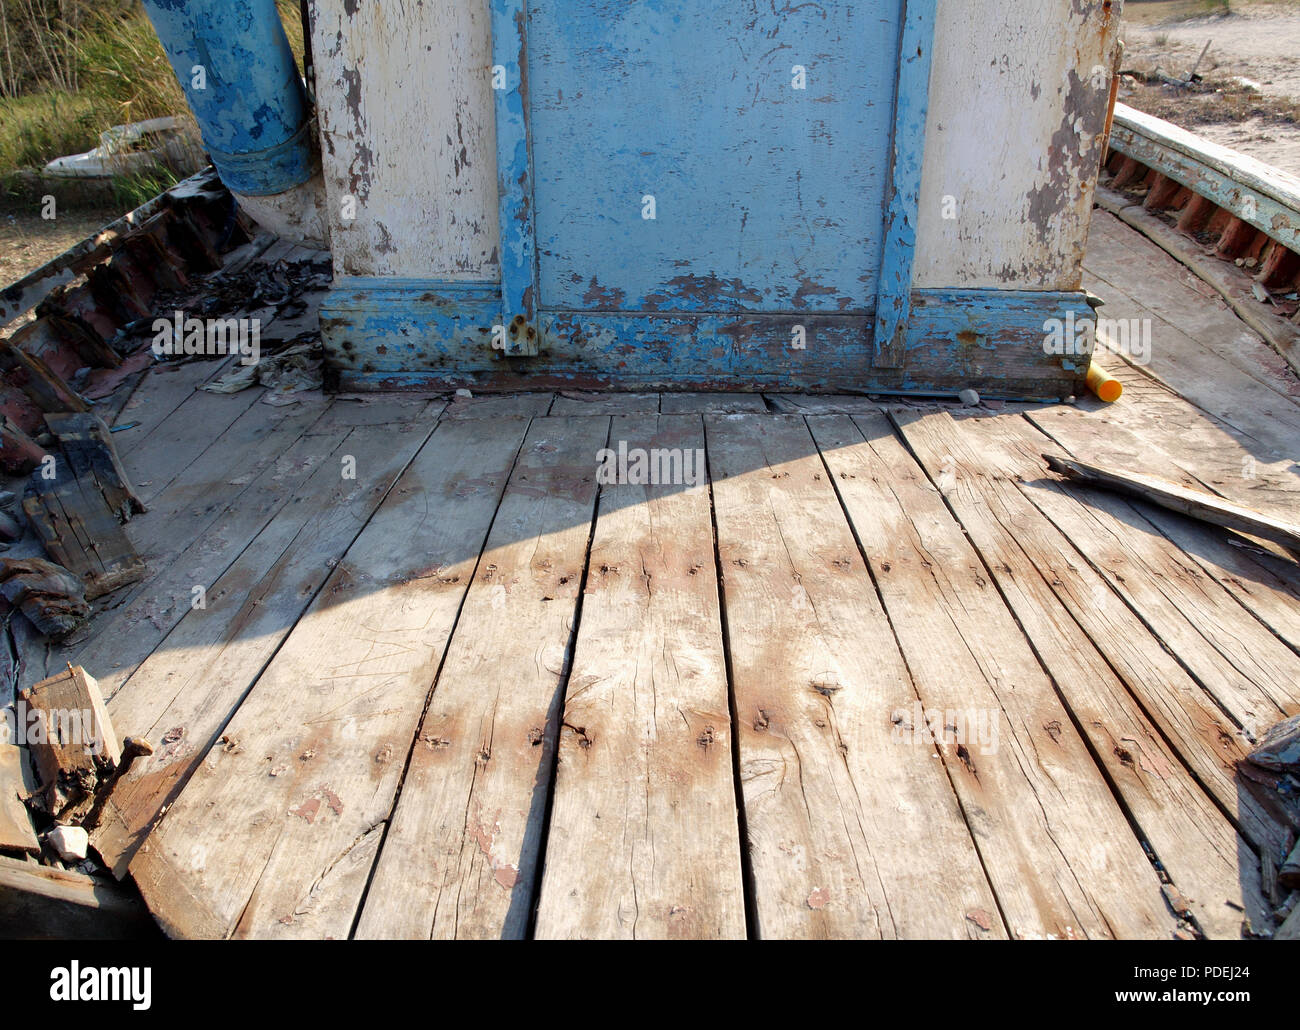 View Deck Of Old And Weathered Fishing Boat With Peeling Paint At